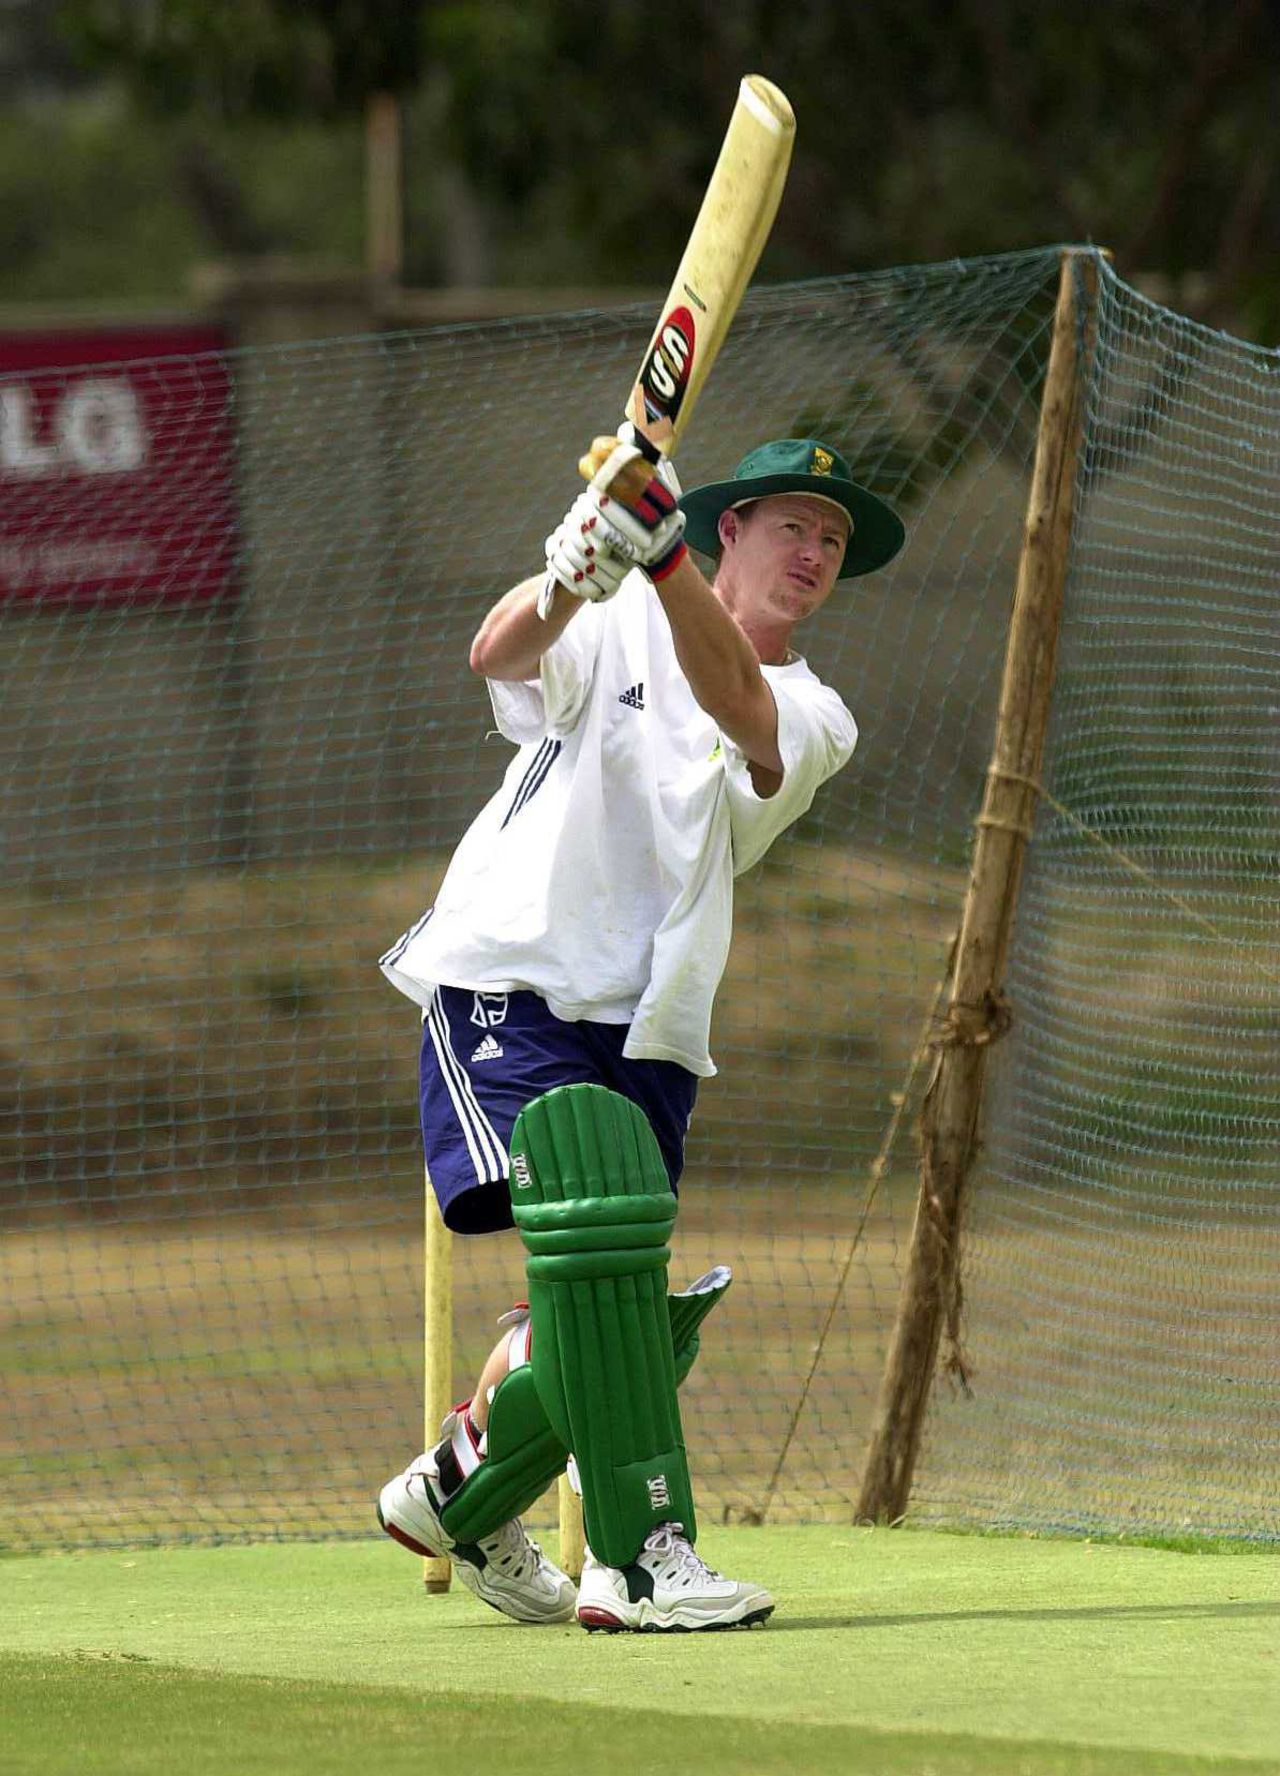 Lance Klusener bats in the nets the day before the semi-final against India, ICC KnockOut Trophy, Nairobi, October 12, 2000